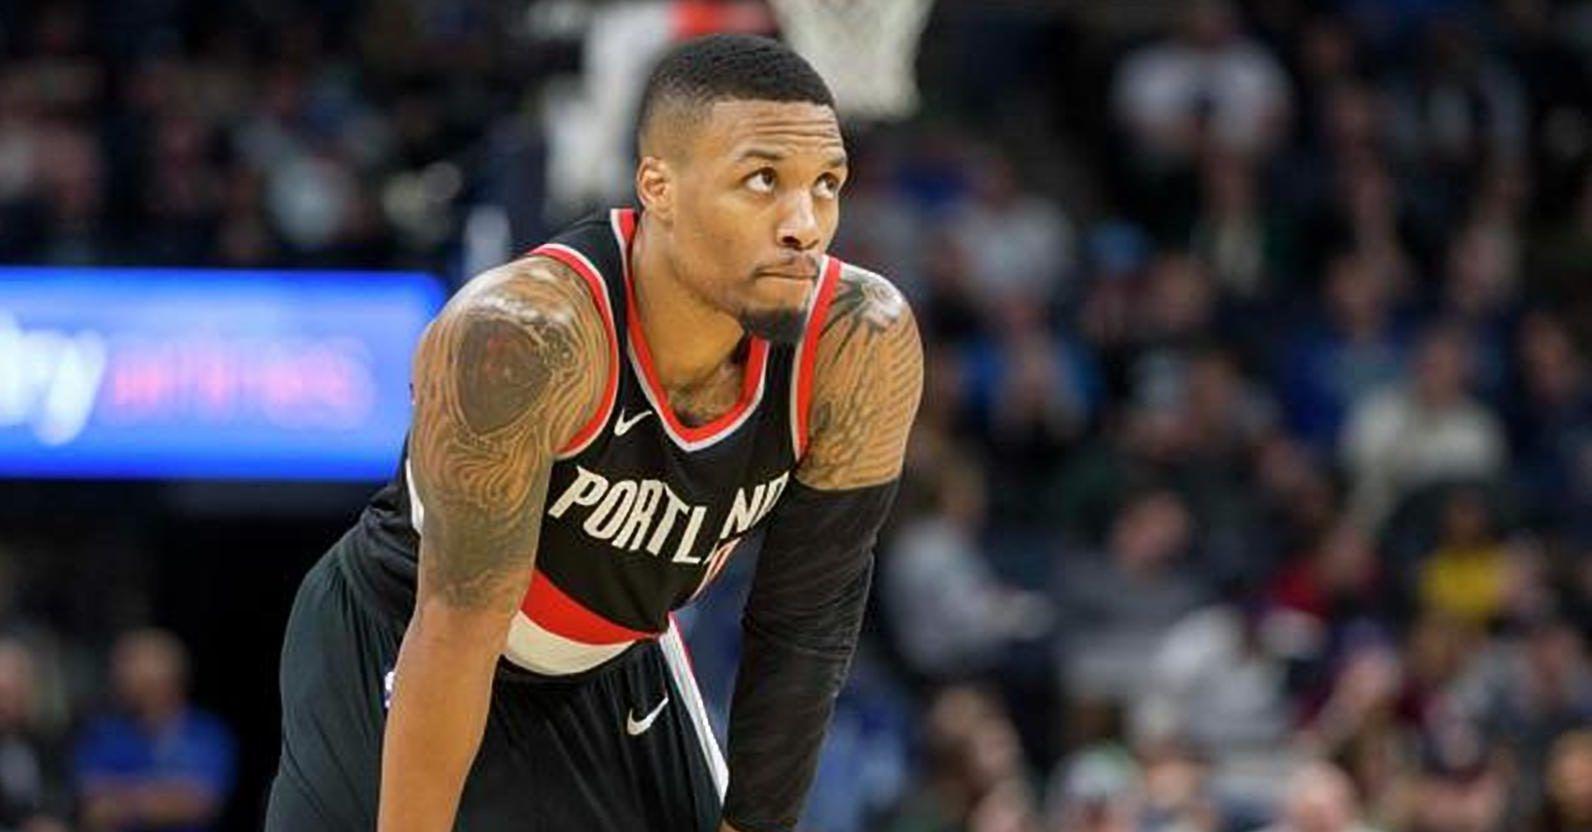 Team news: Damian Lillard ruled out of game versus Thunder